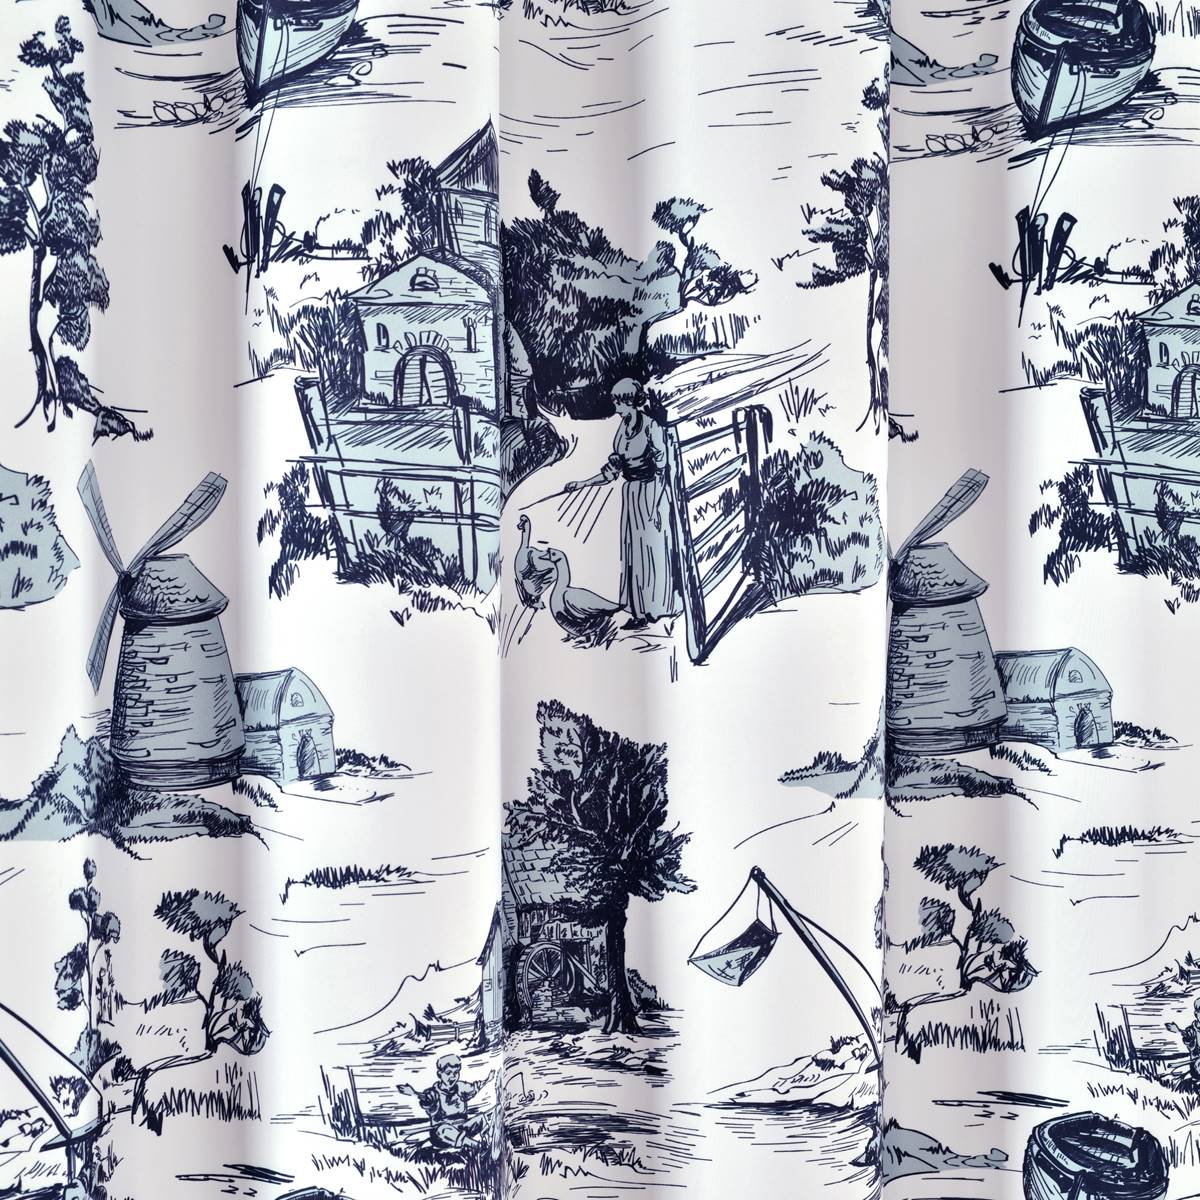 Lush Decor(R) French Country Toile Shower Curtain